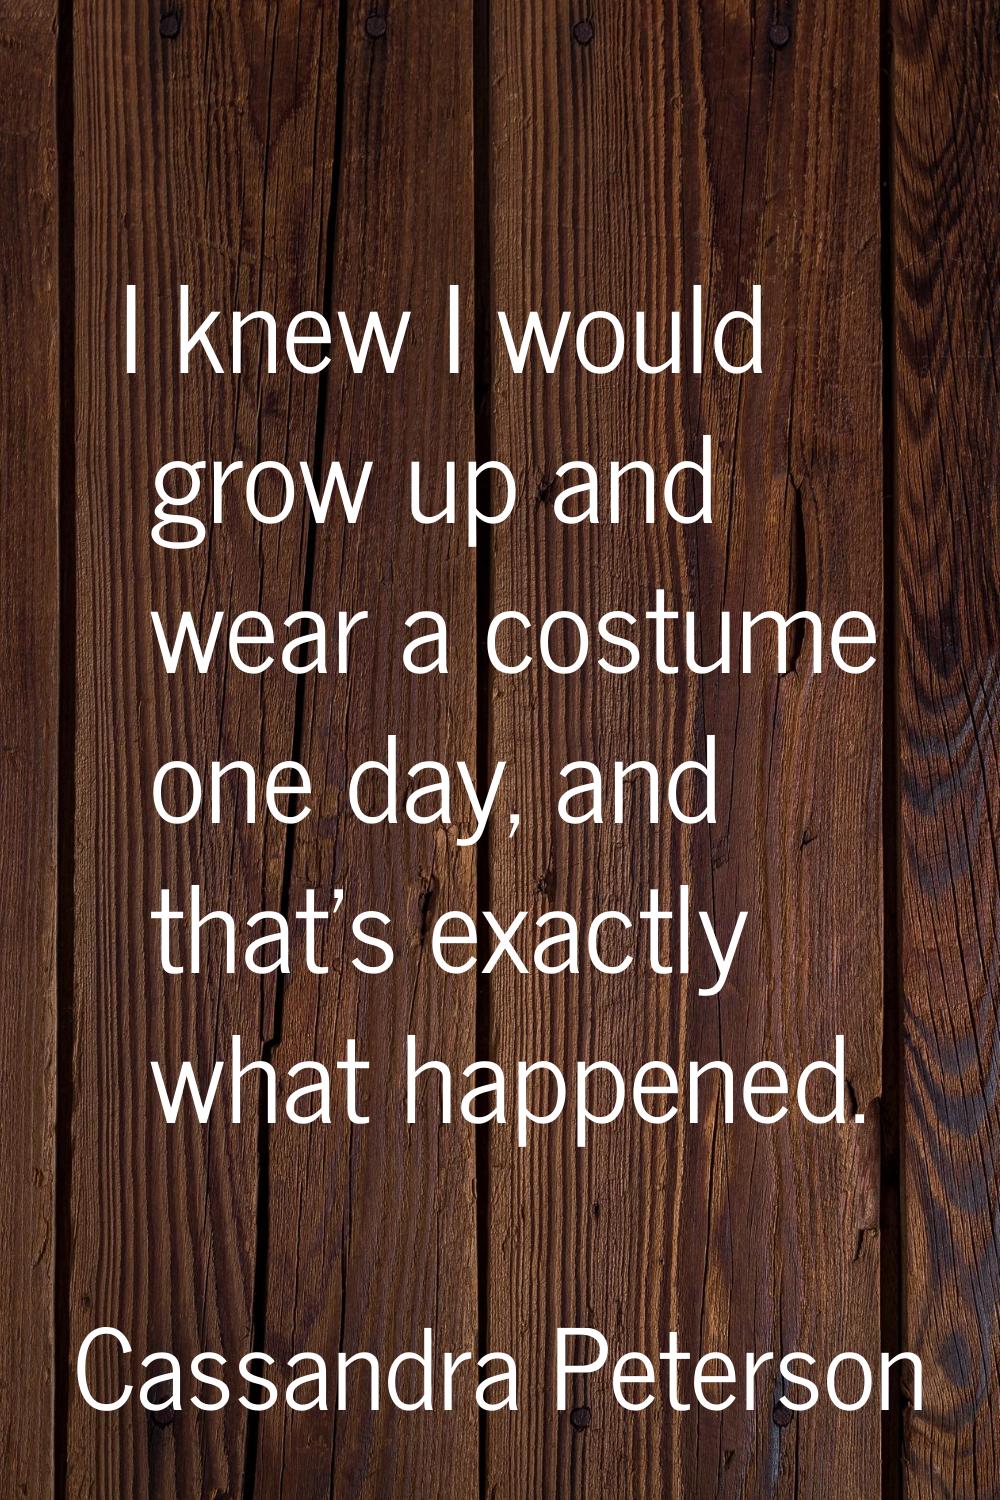 I knew I would grow up and wear a costume one day, and that's exactly what happened.